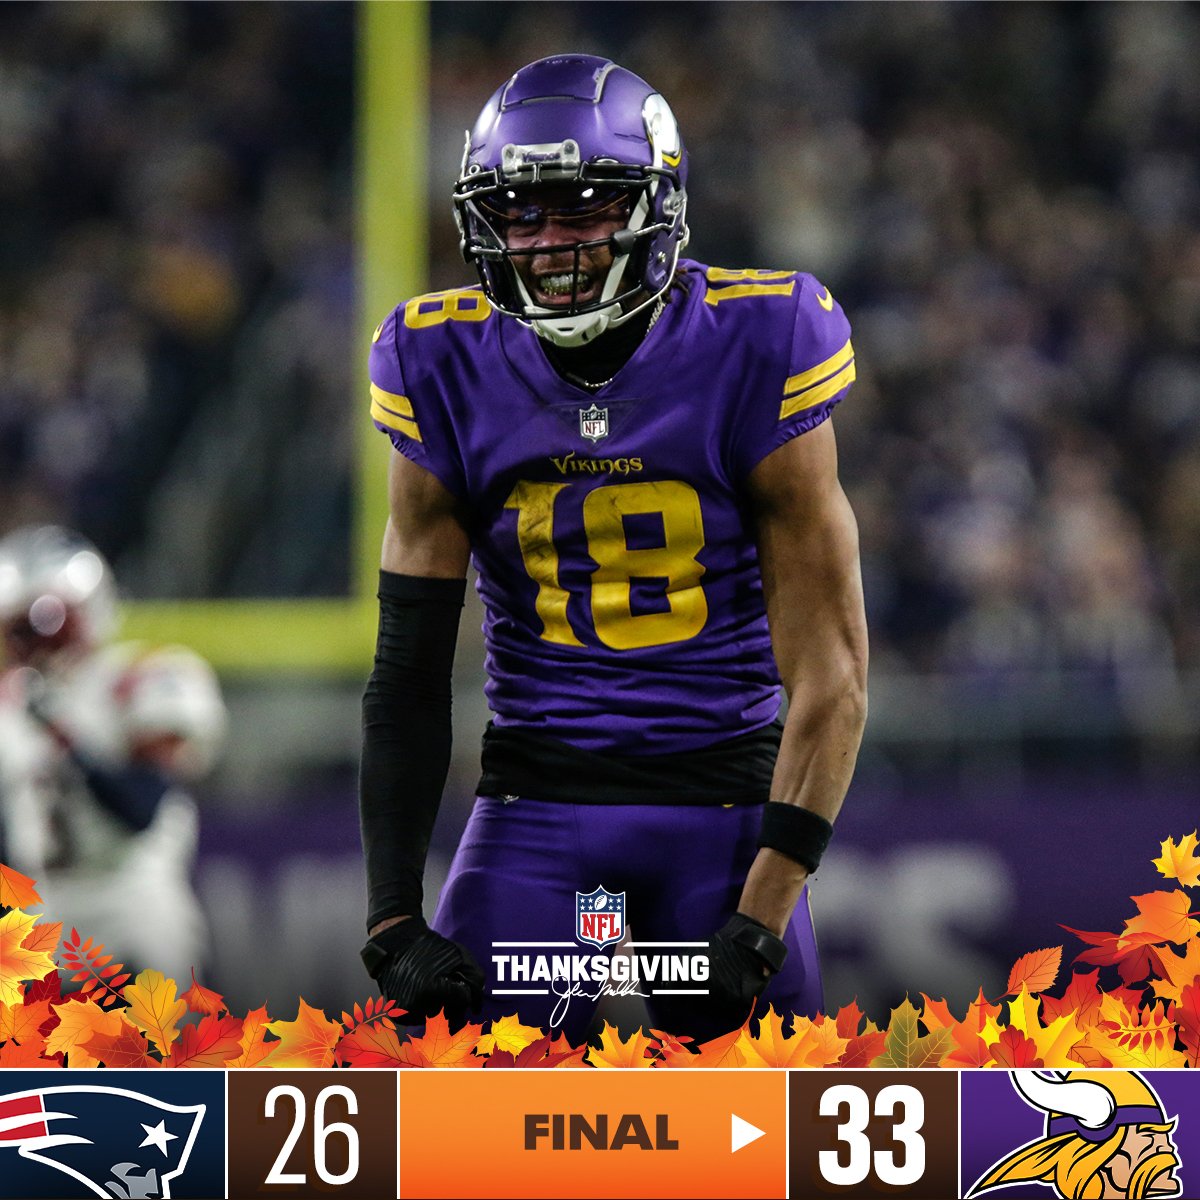 FINAL: The @Vikings end their Thanksgiving at 9-2. #NEvsMIN